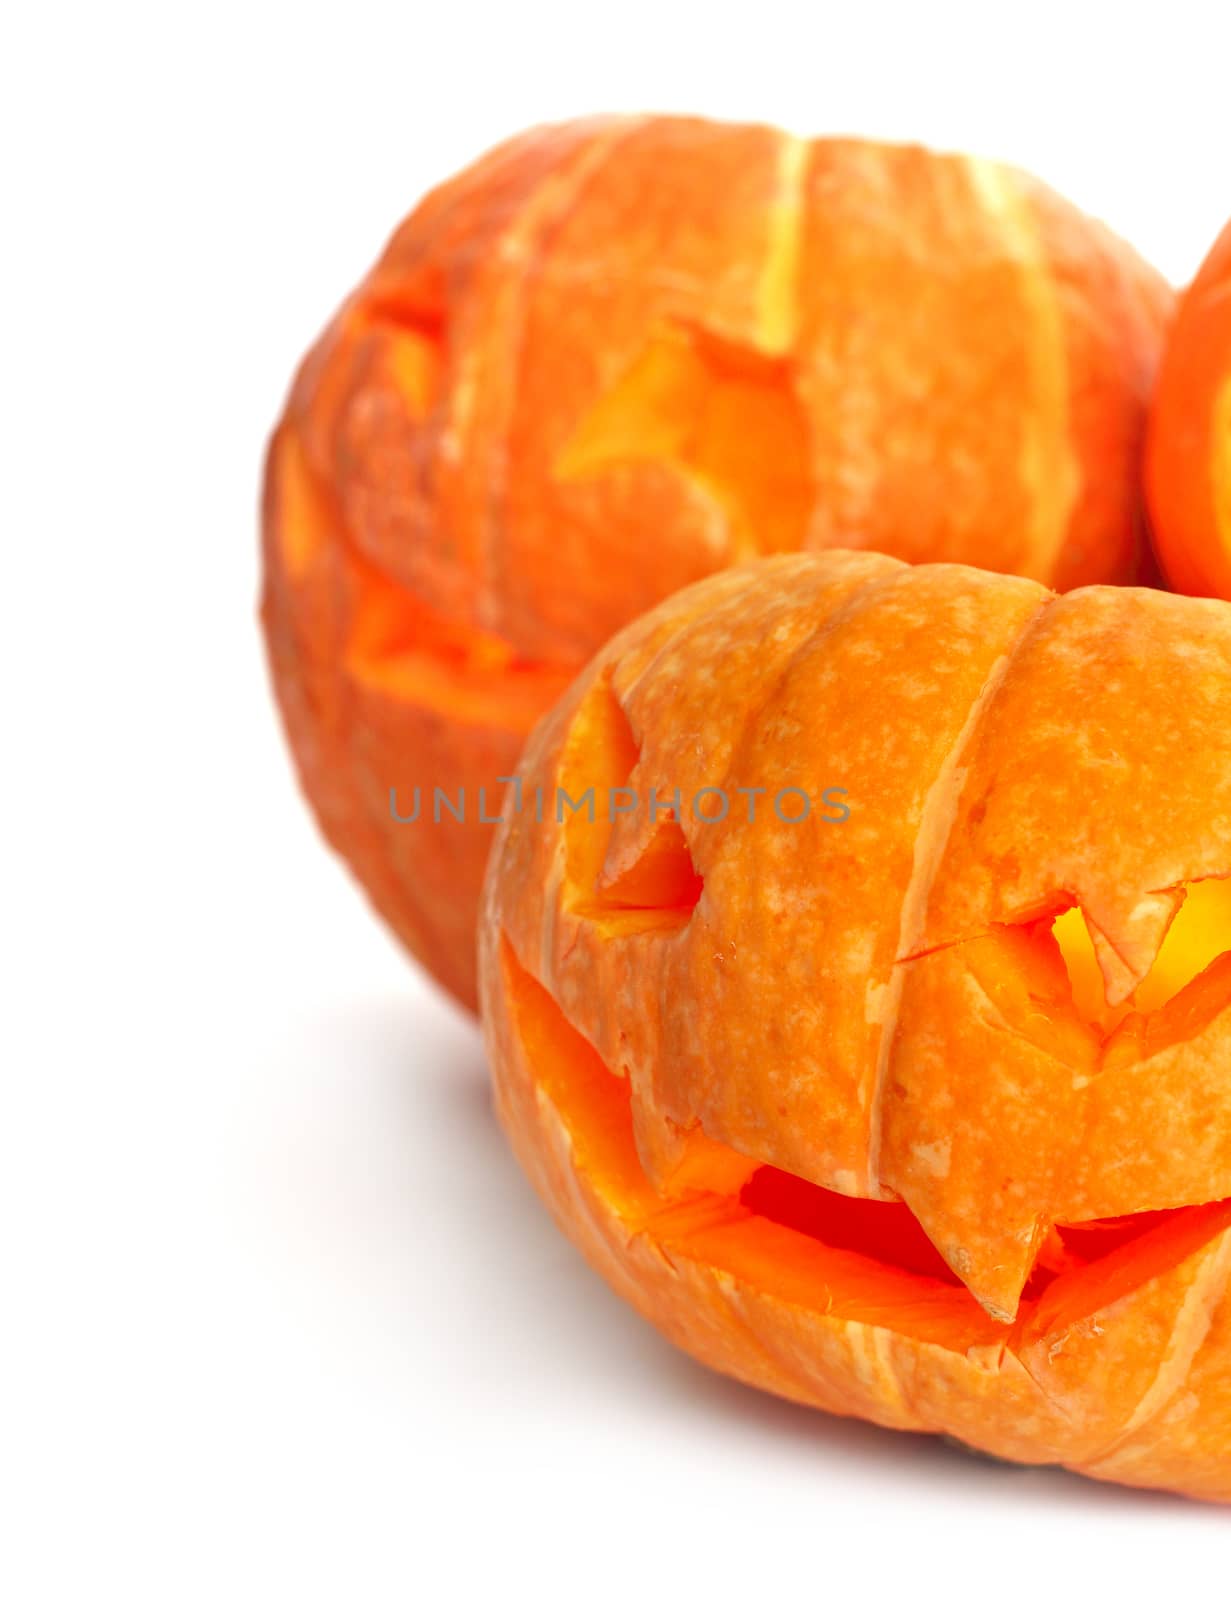 Glowing Halloween Pumpkins isolated on white background